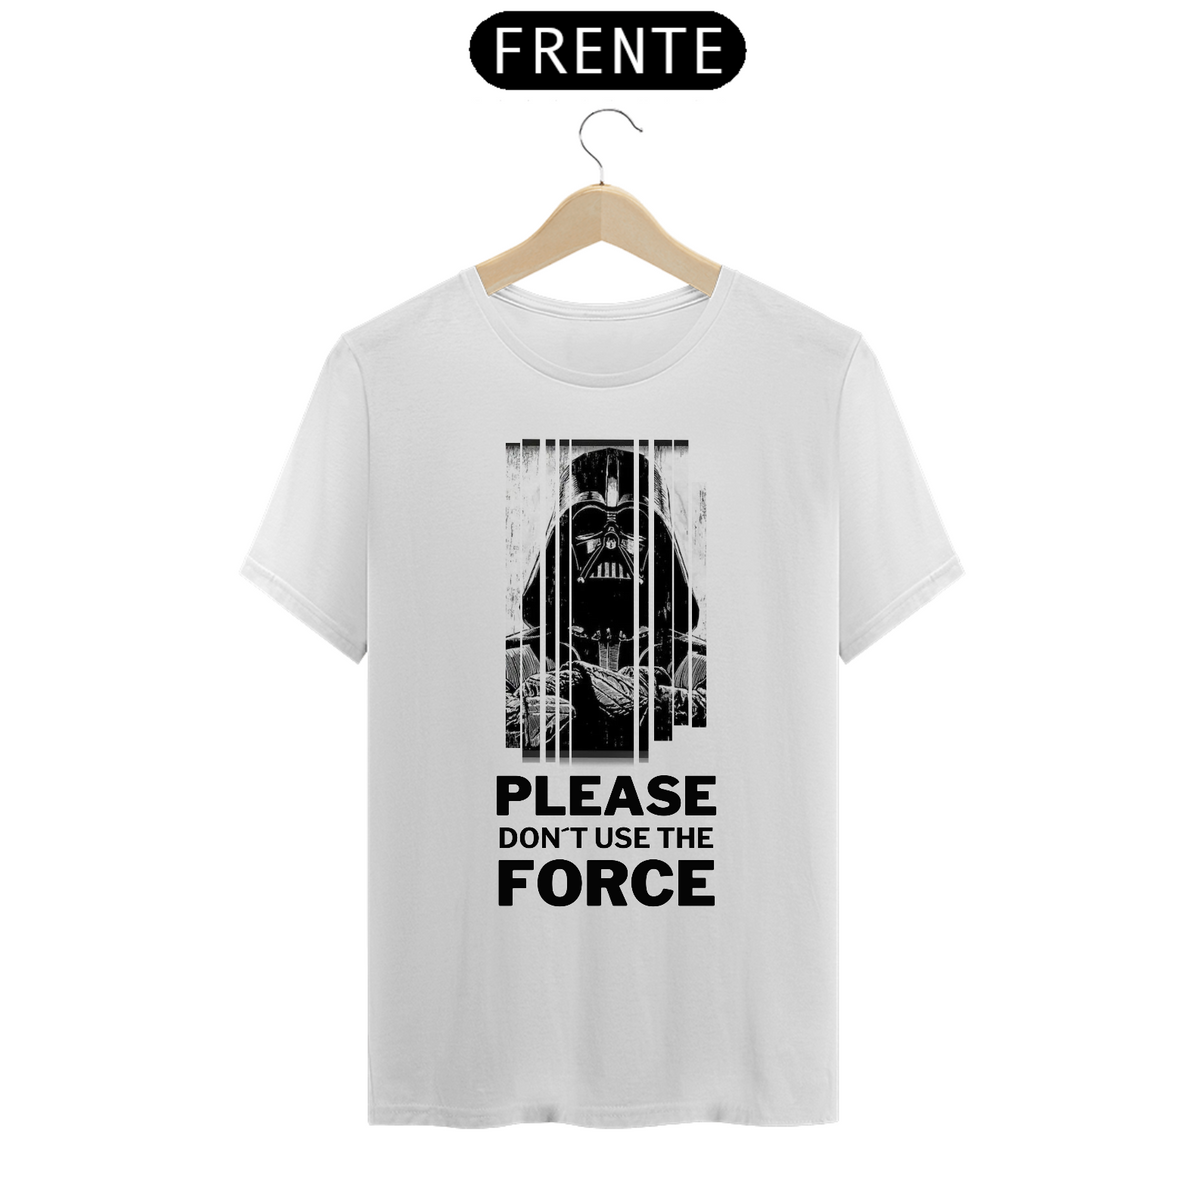 Nome do produto: Please don´t use the force